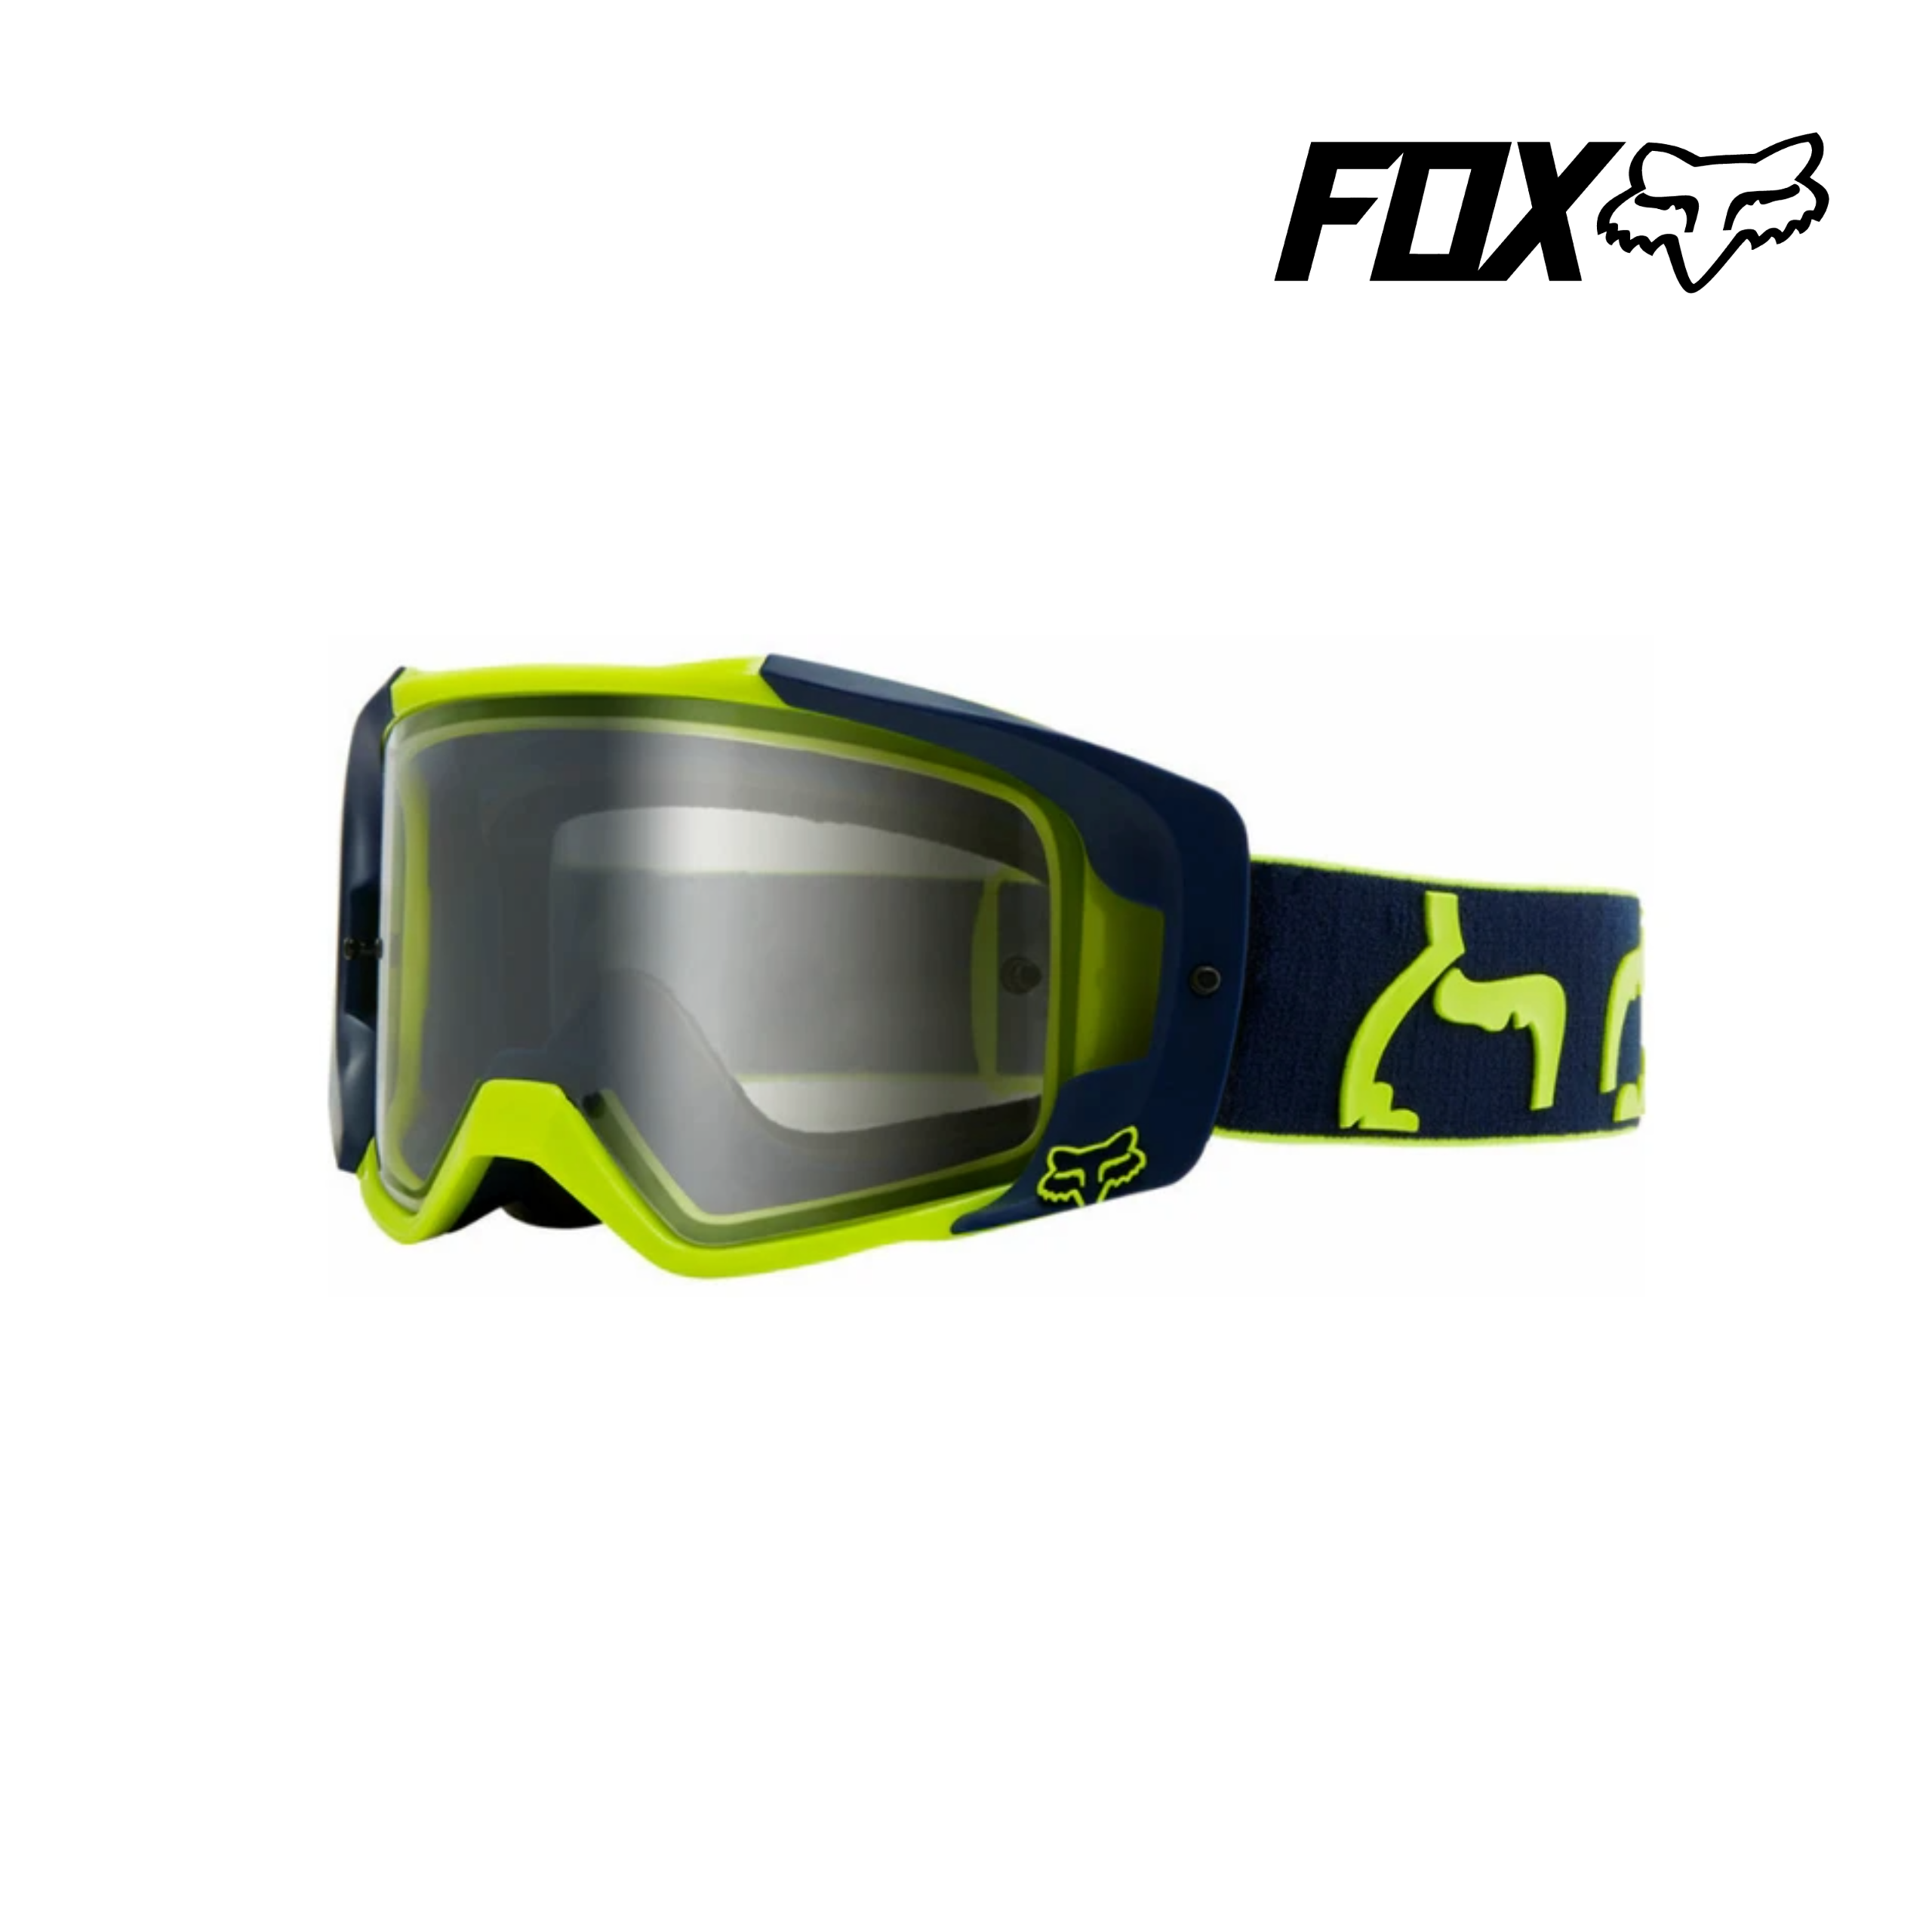 Fox VUE Dusc Motocross Goggles Navy Blue with Luminous Yellow 23987-007-OS